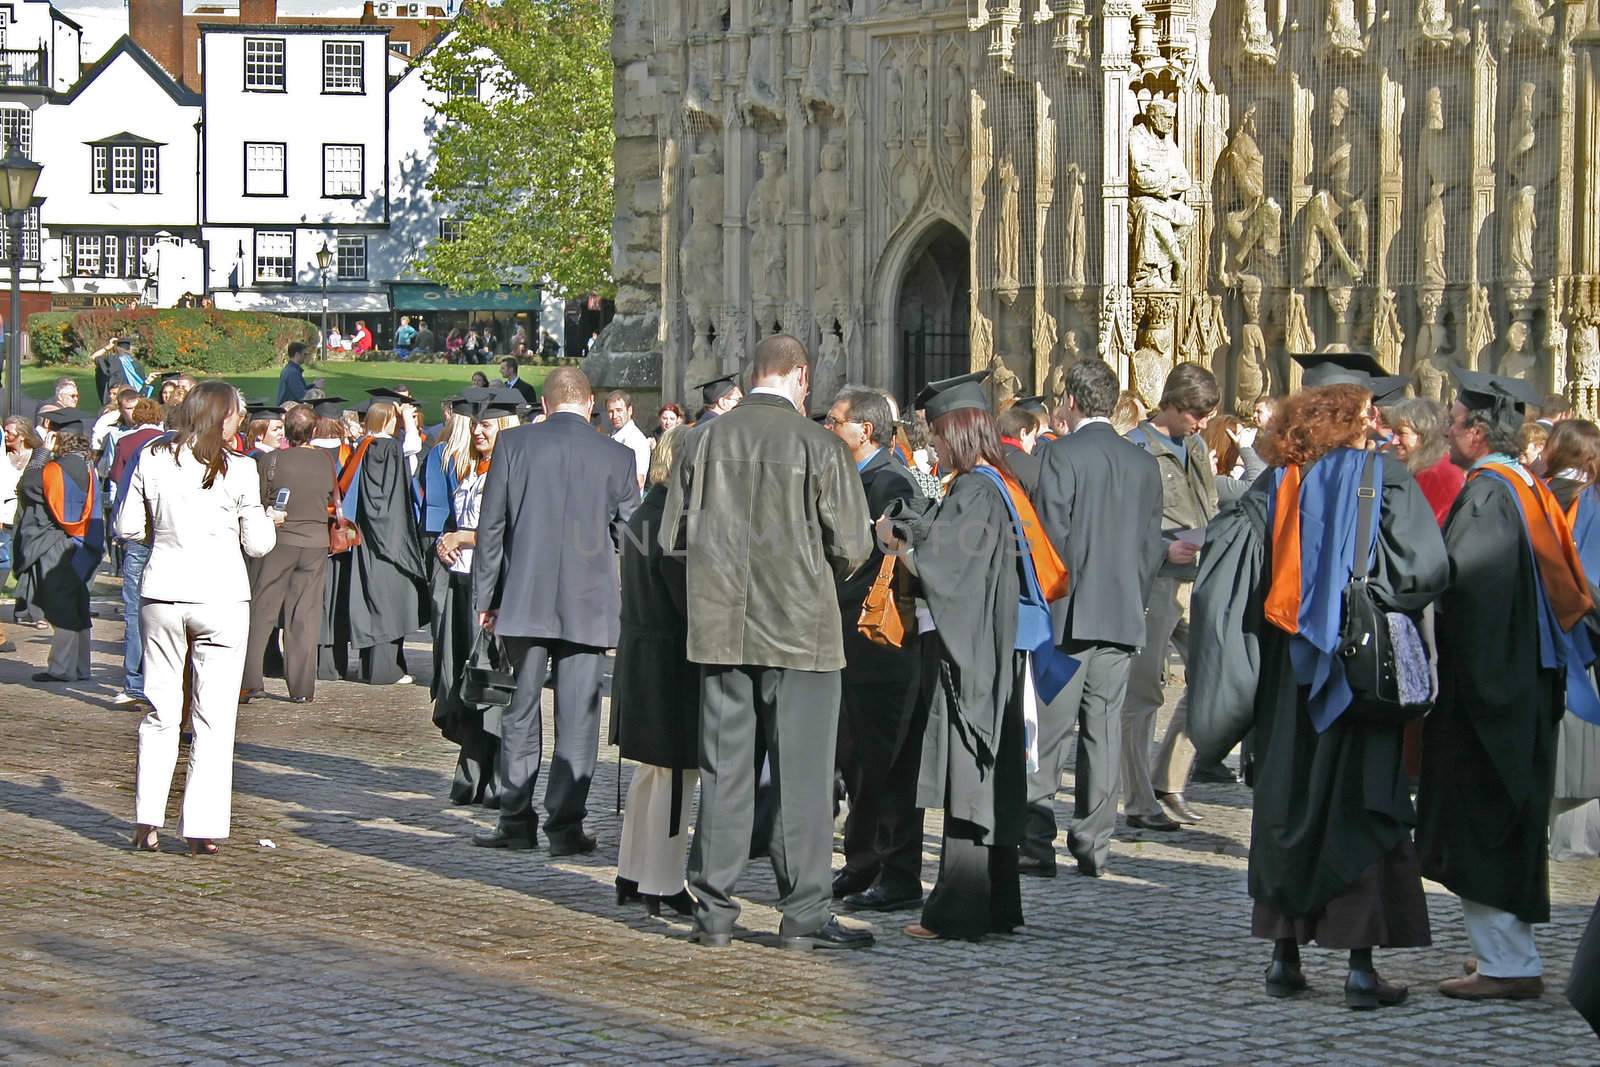 Graduation Ceremony Outside Exeter Cathedral by green308